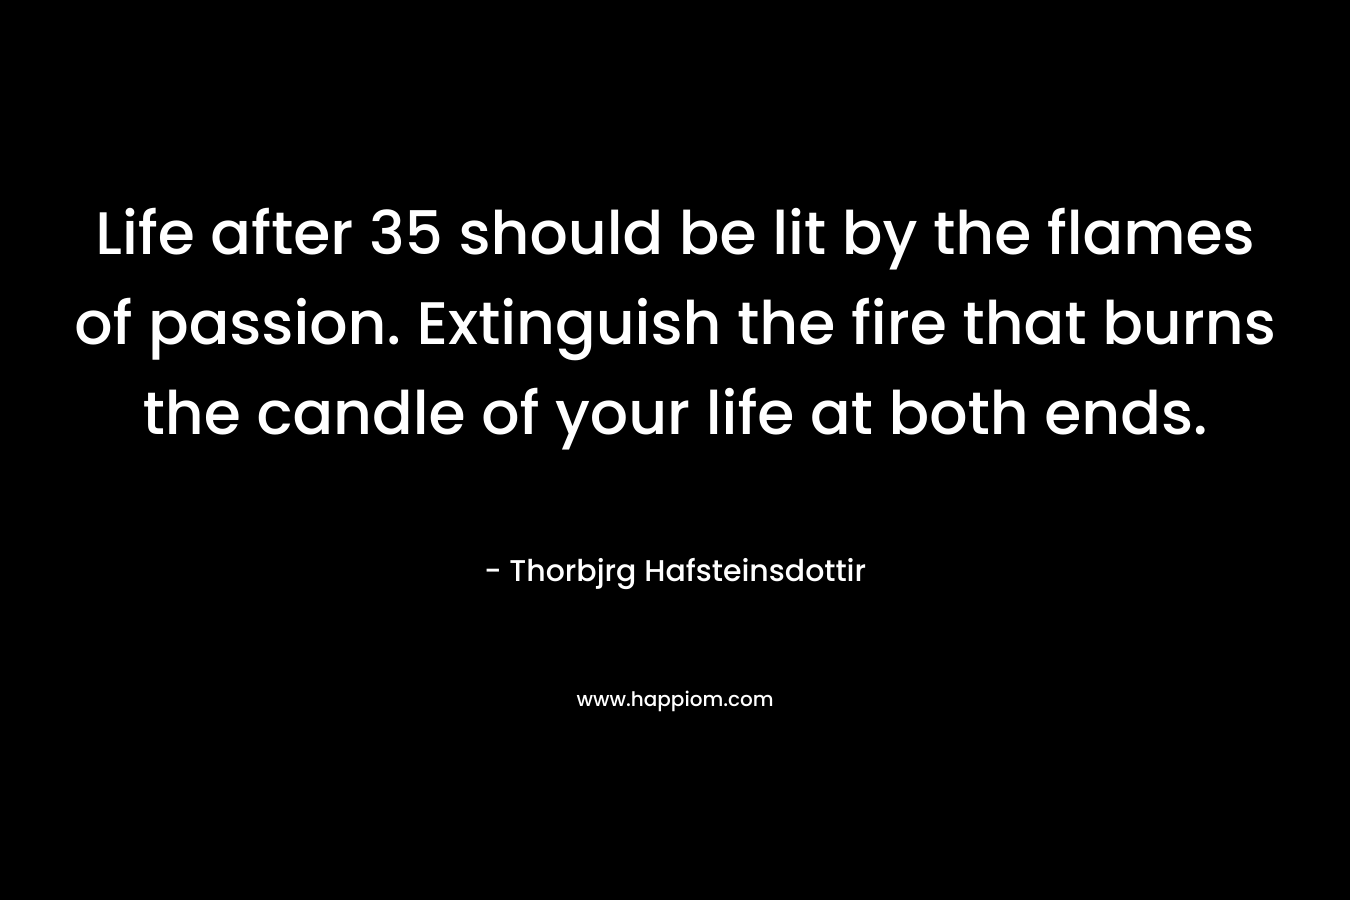 Life after 35 should be lit by the flames of passion. Extinguish the fire that burns the candle of your life at both ends. – Thorbjrg Hafsteinsdottir